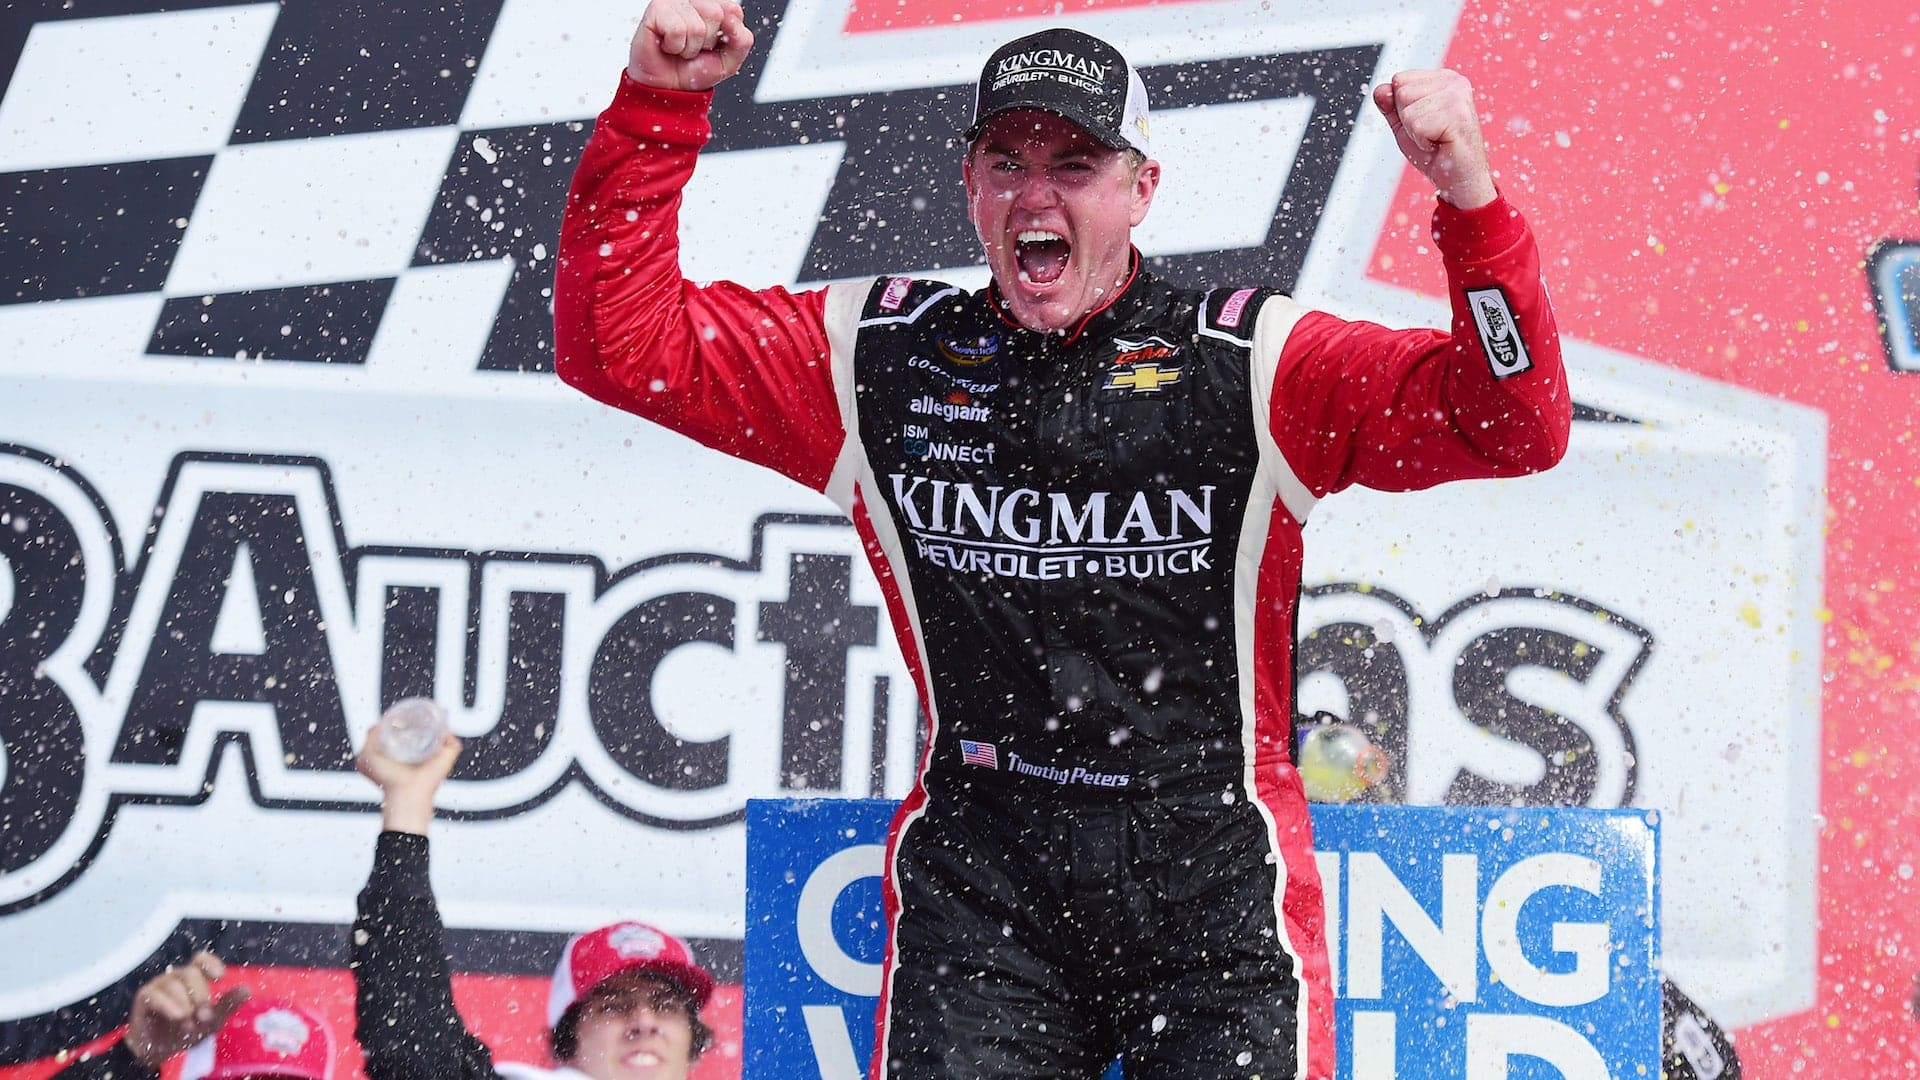 Timothy Peters Wins NASCAR Truck Series Race After Last Lap Wreck at Talladega